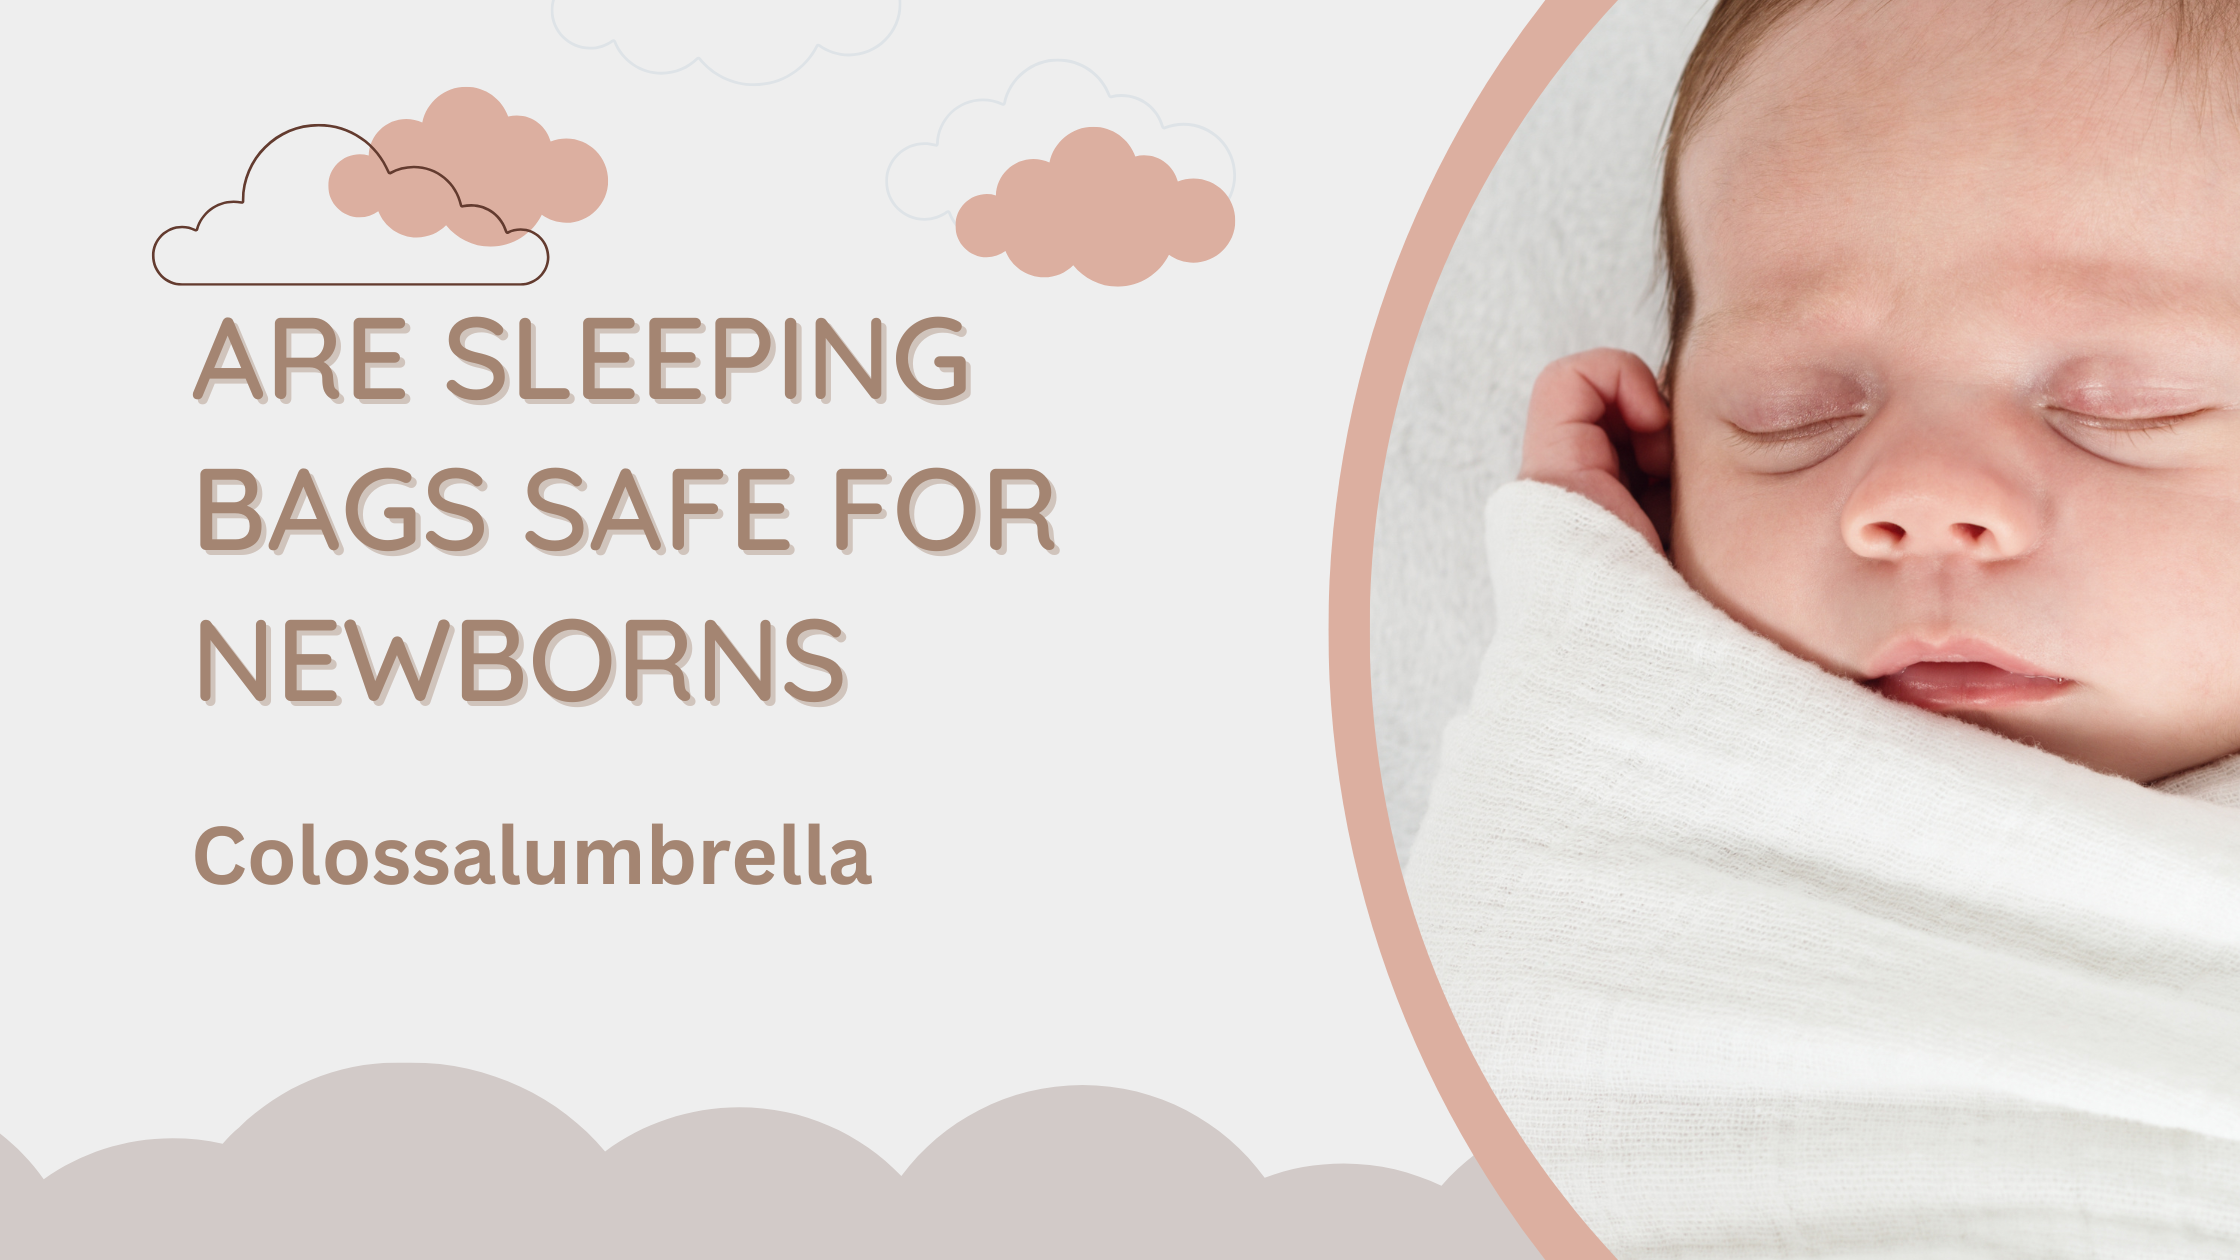 Are sleeping bags safe for newborns